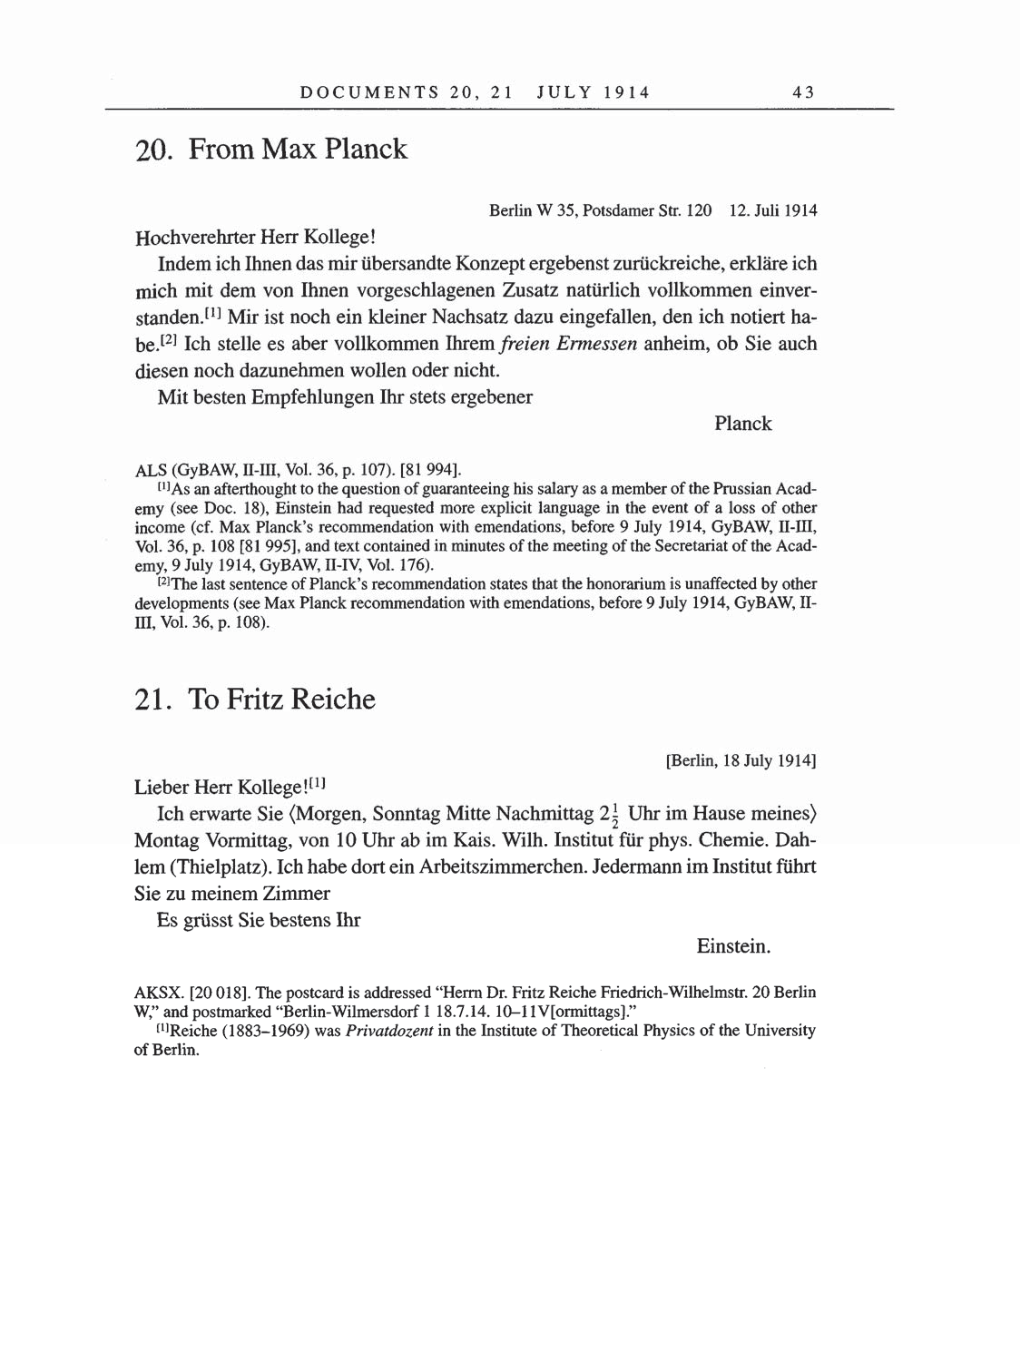 Volume 8, Part A: The Berlin Years: Correspondence 1914-1917 page 43